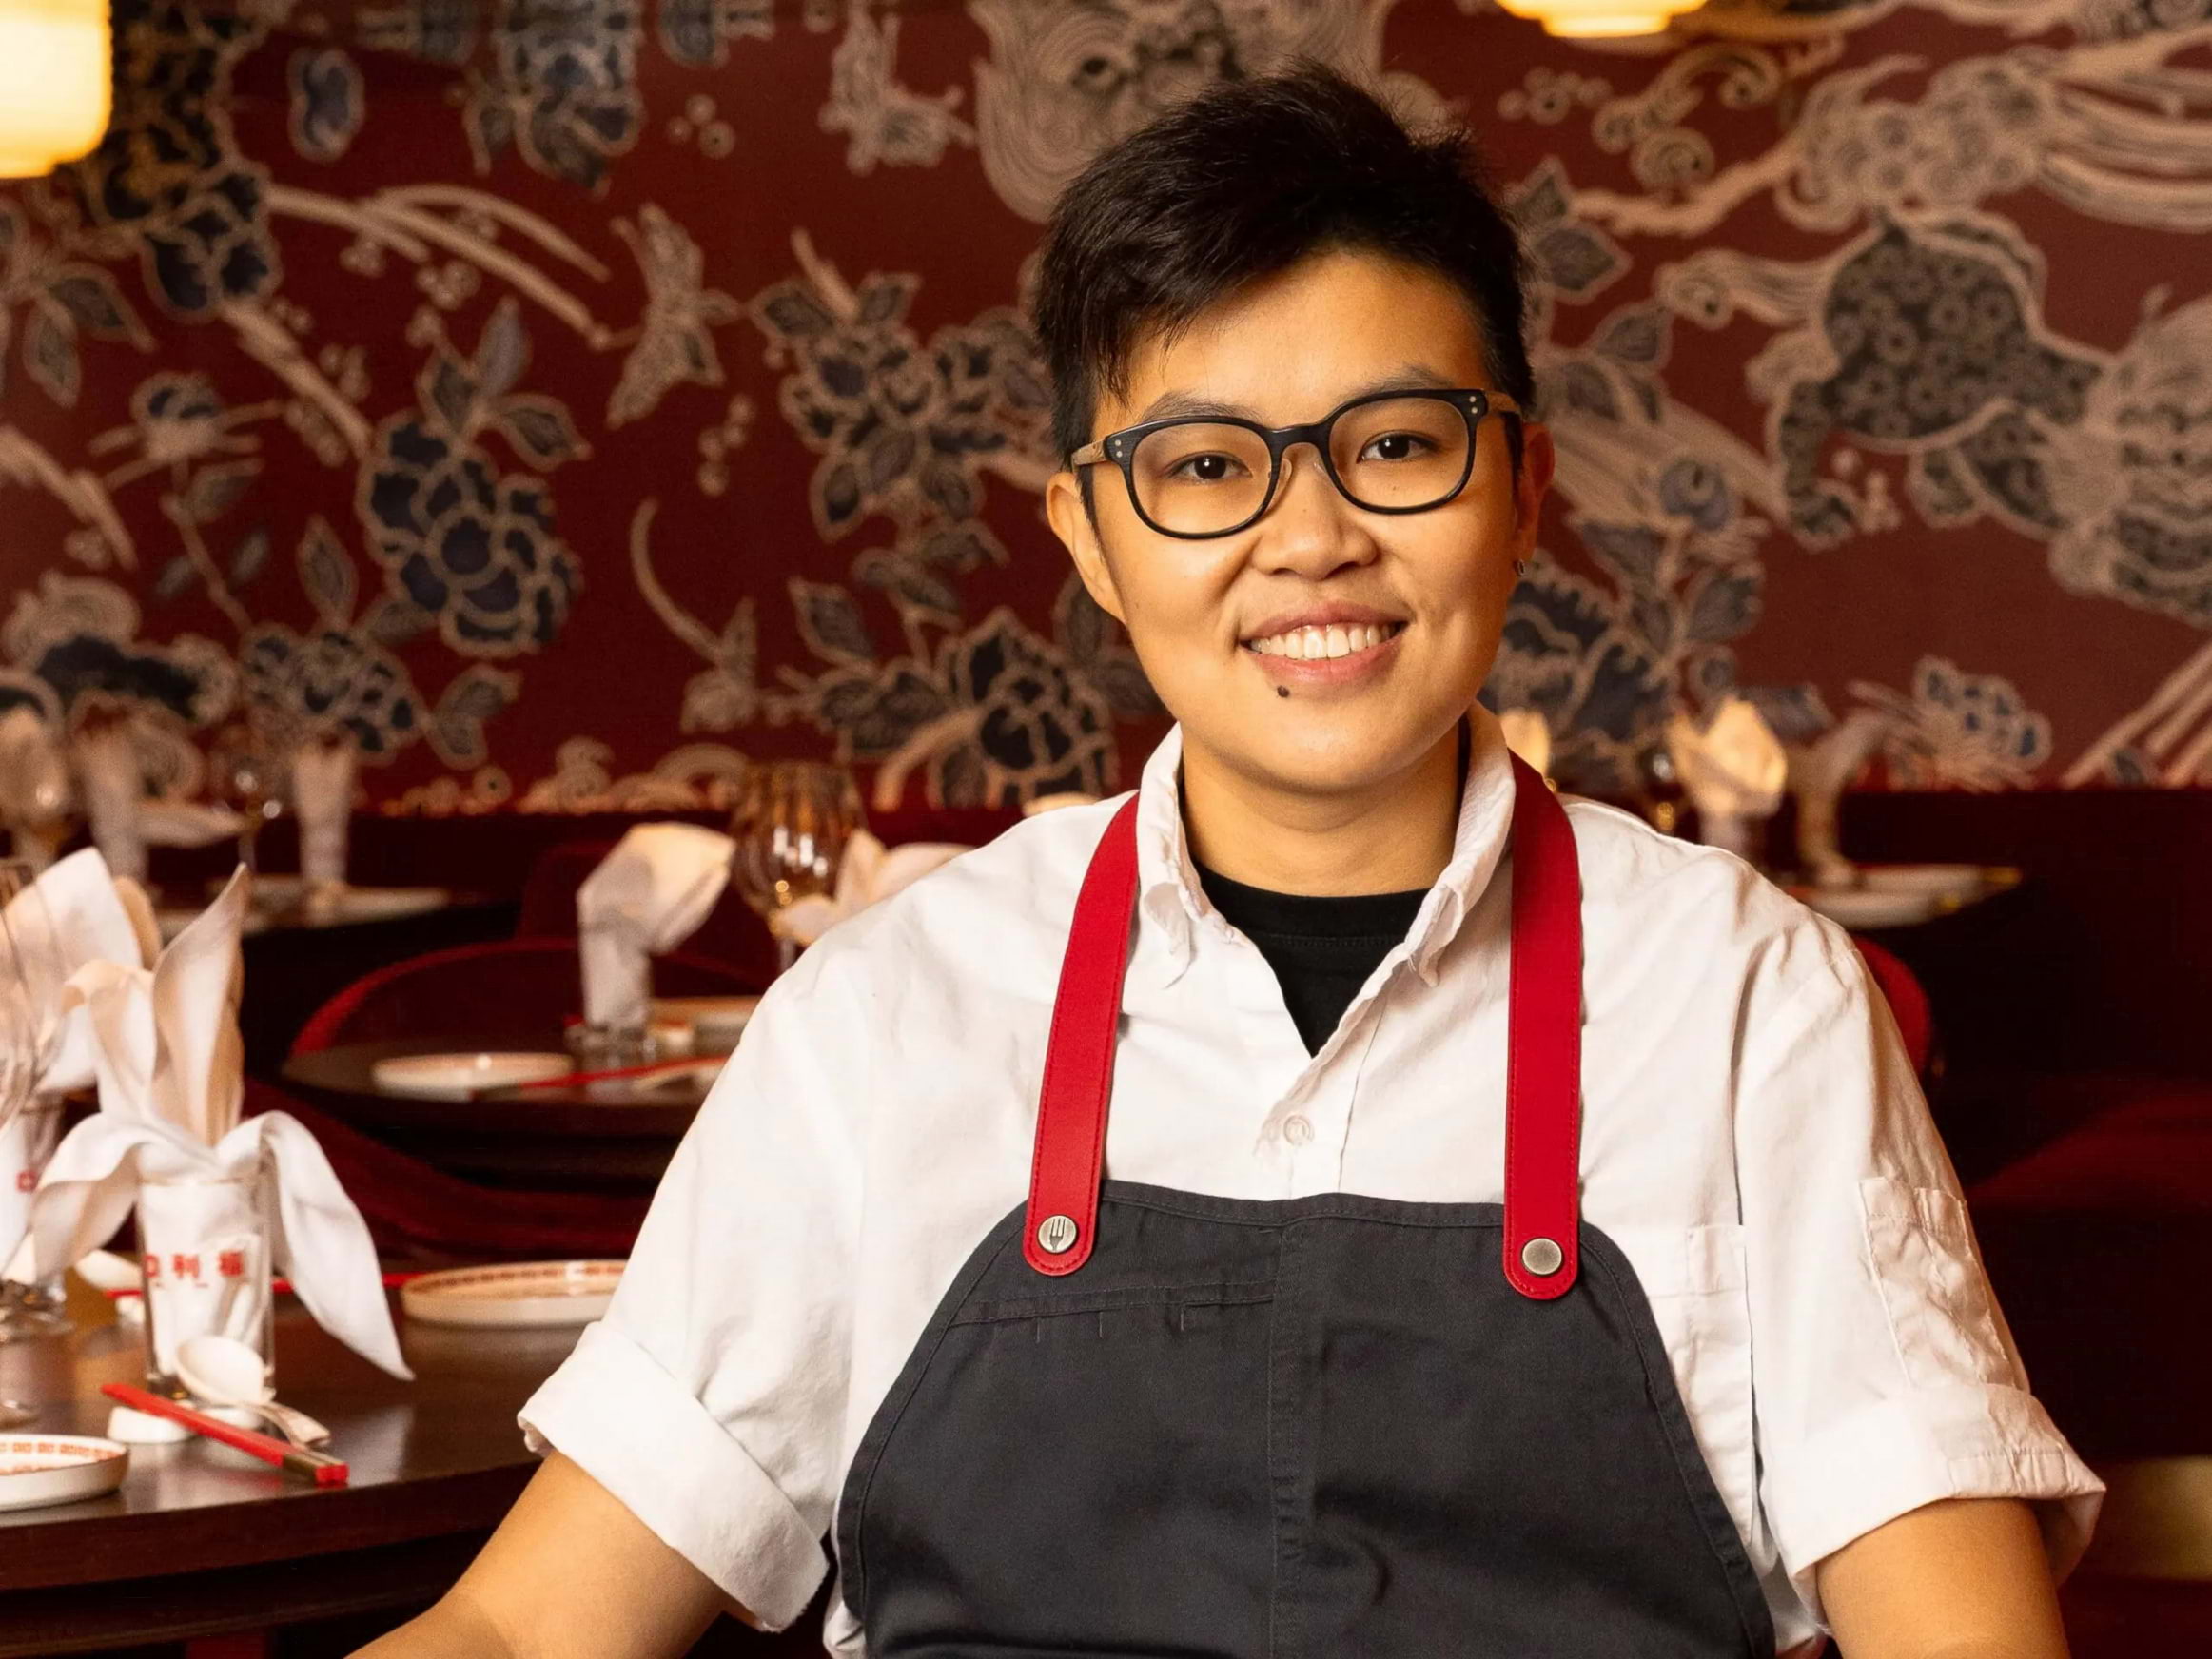 Ho Lee Fook's residency at Carousel will have you going OMG